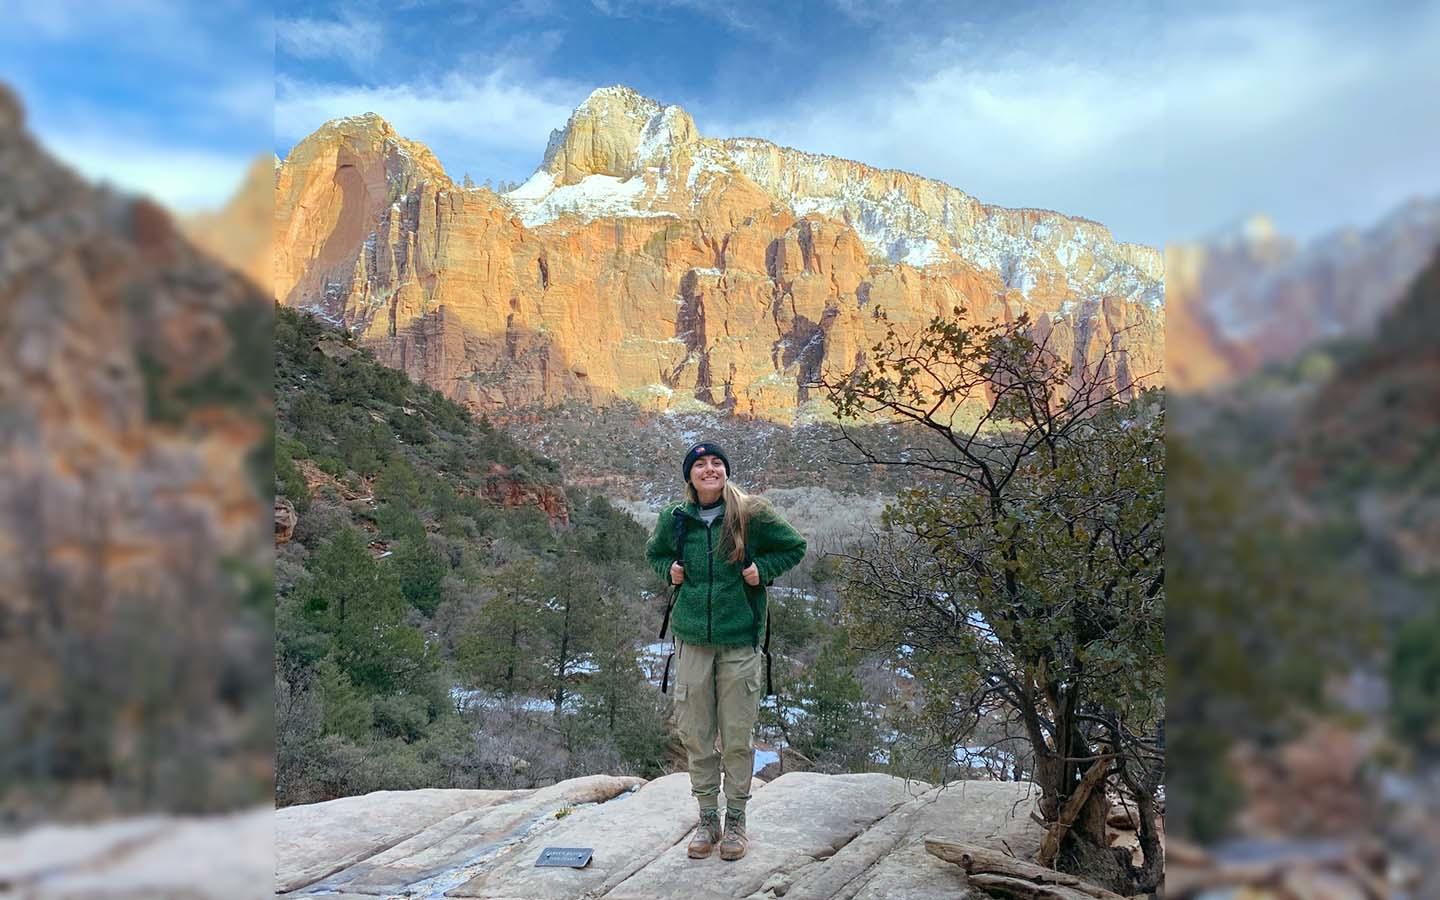 Jordyn Berg wearing a backpack and hiking in Zion National Park